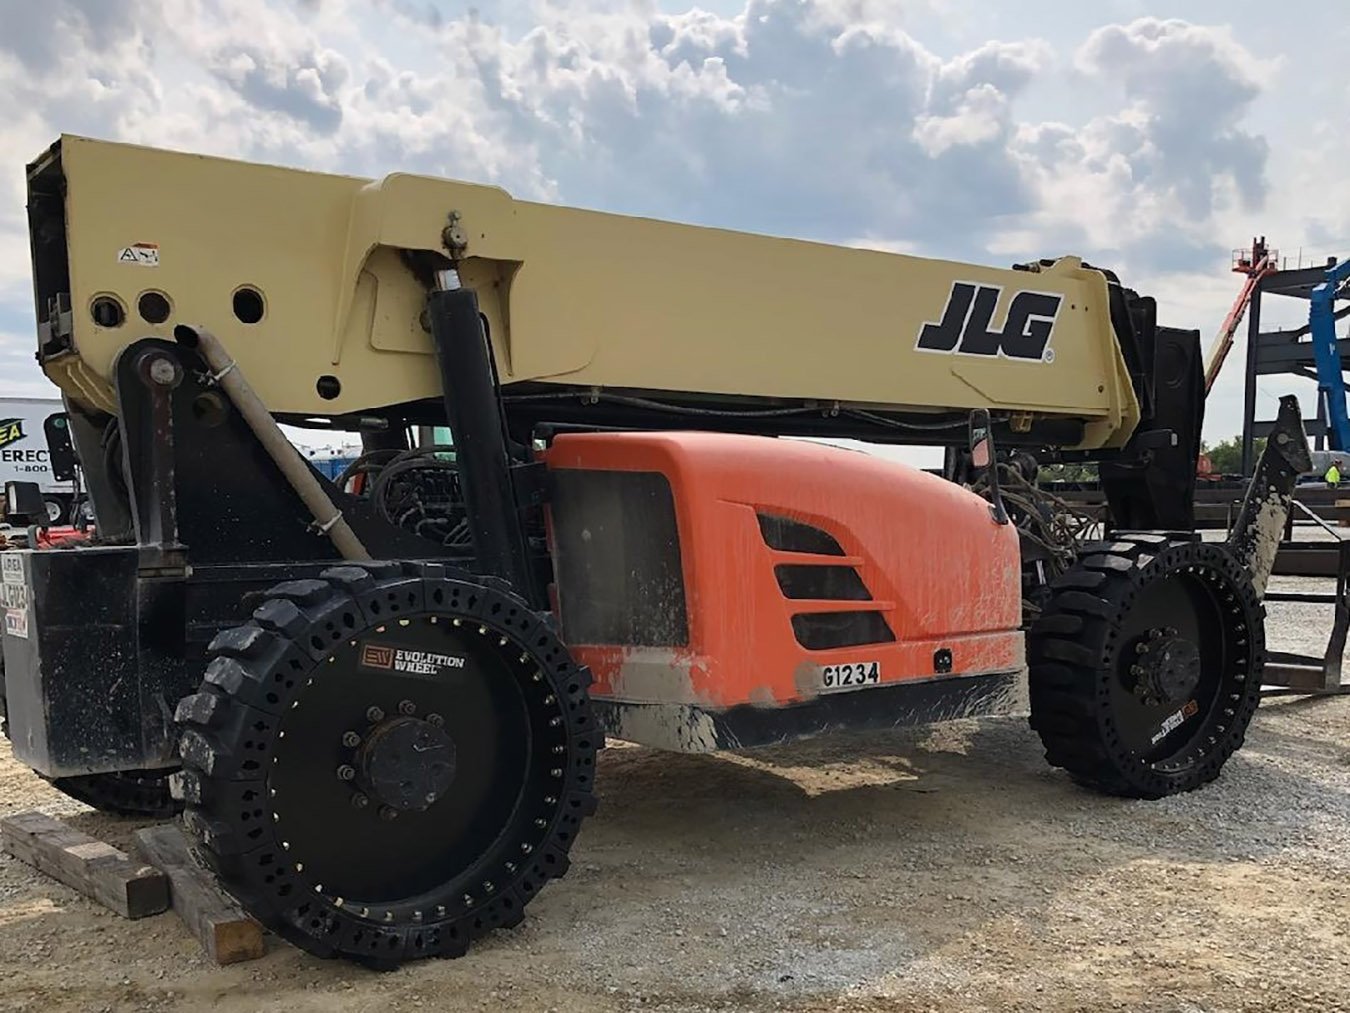 This image shows our Xtreme telehandler tires on a JLG telehandler